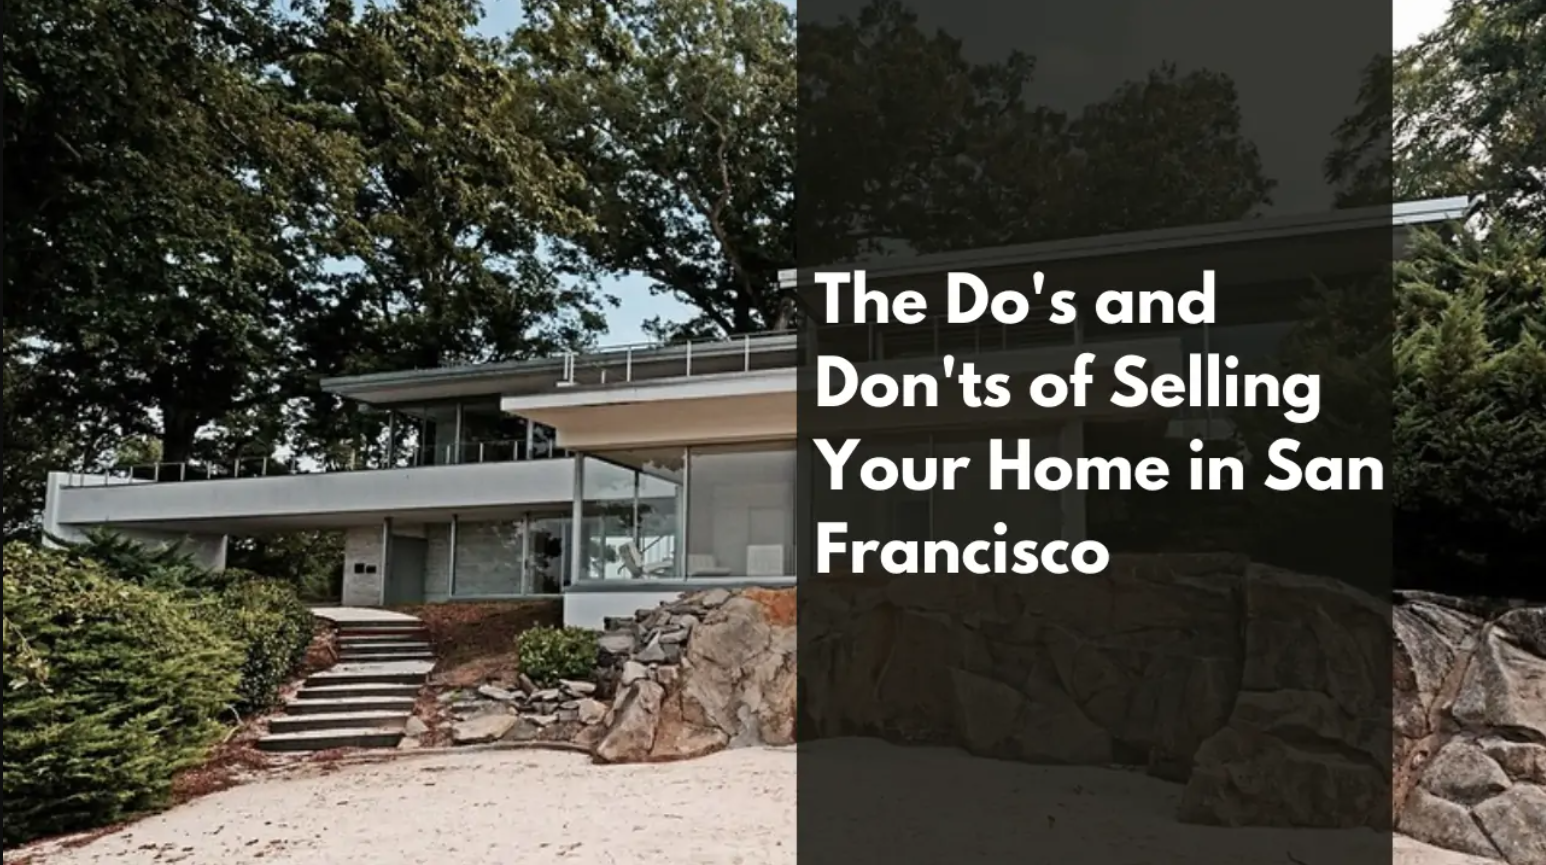 The Do’s and Don’ts of Selling Your Home in San Francisco